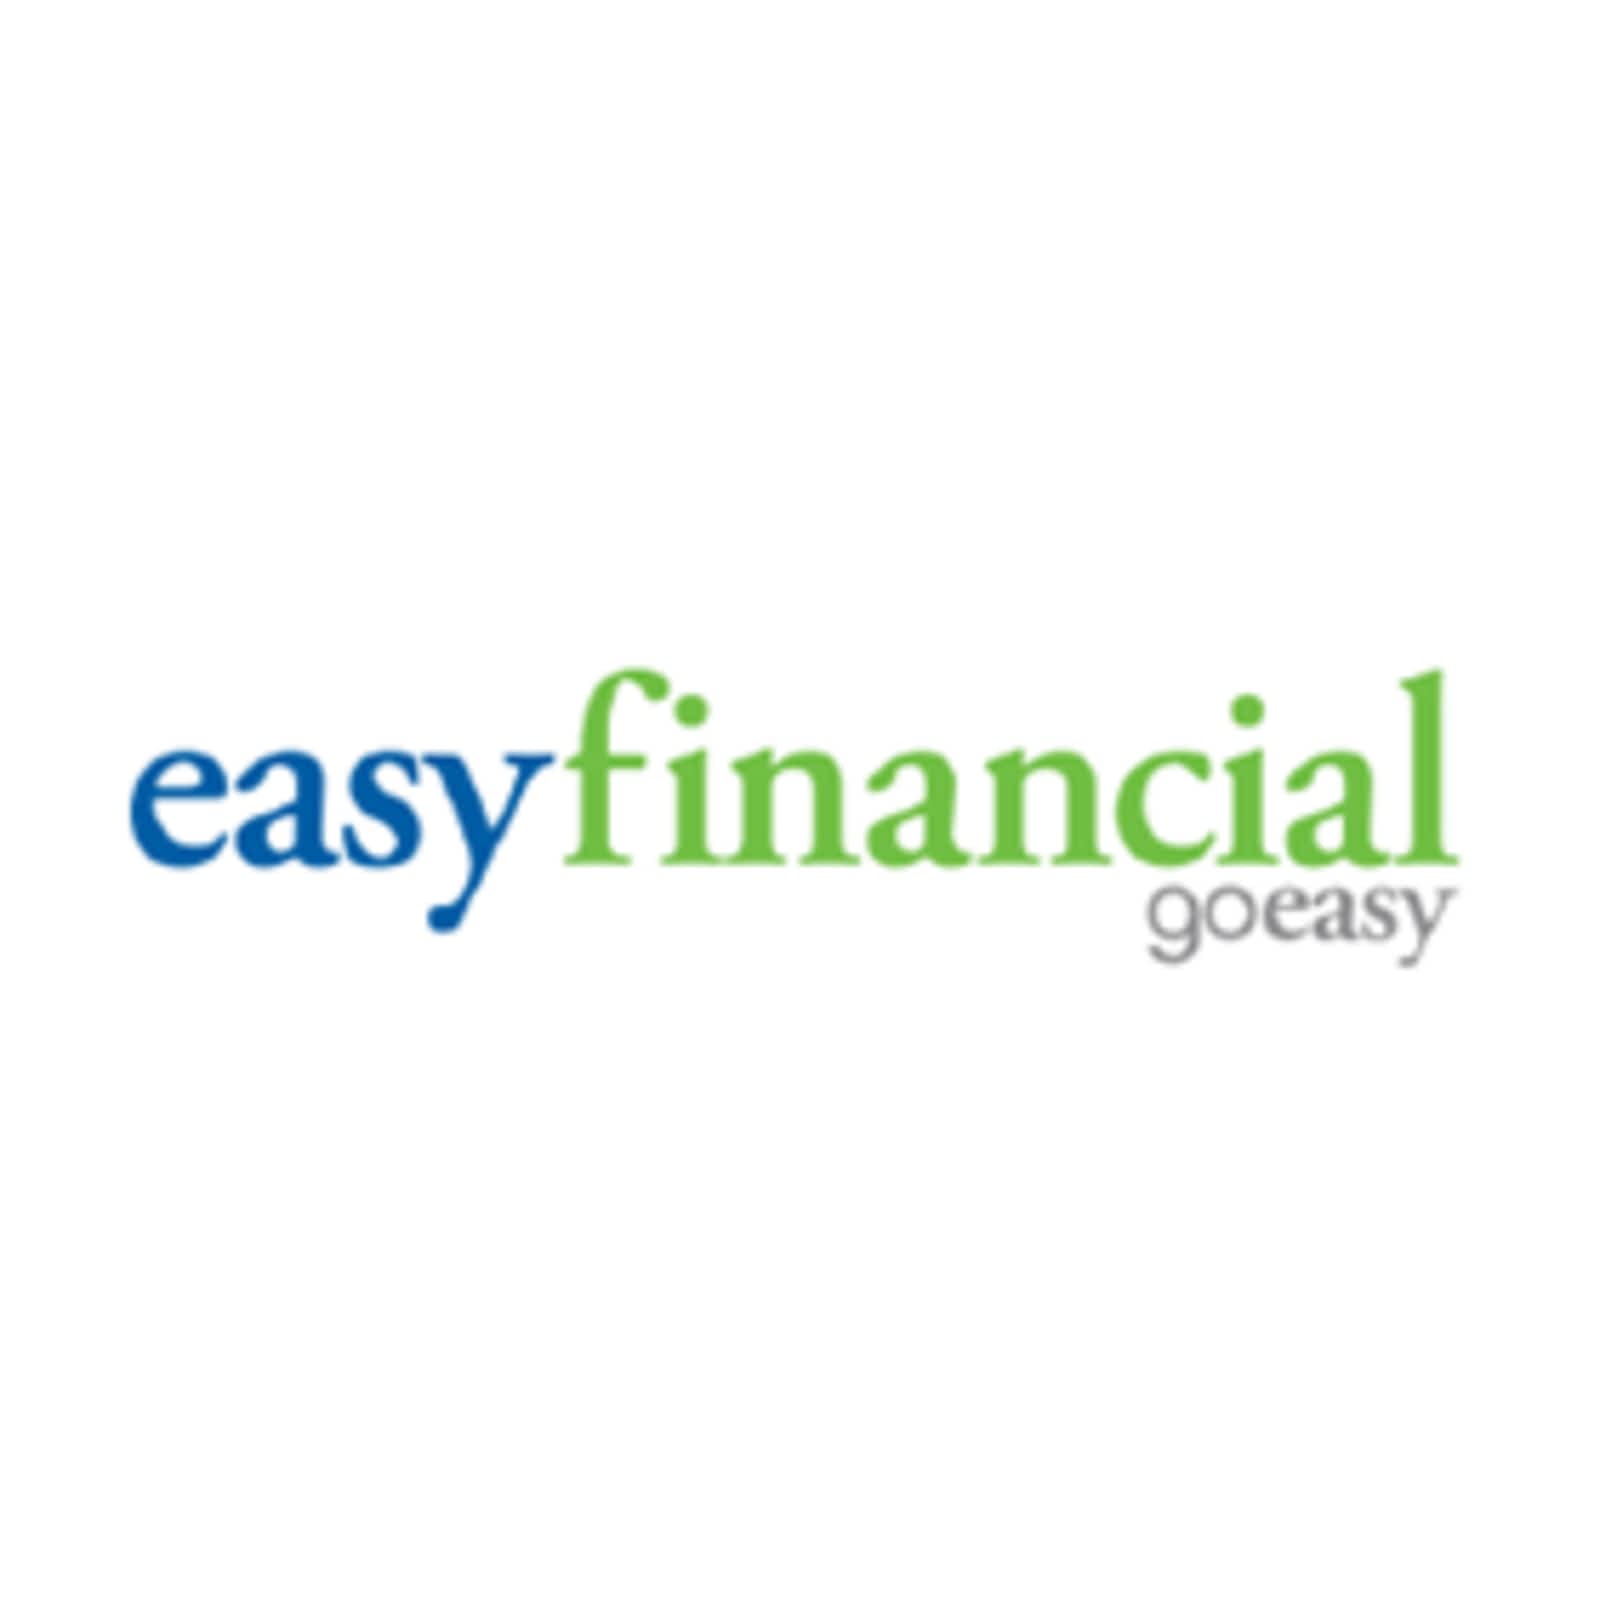 easyfinancial Services 4746 Lakelse Ave, Terrace British Columbia V8G 1R6